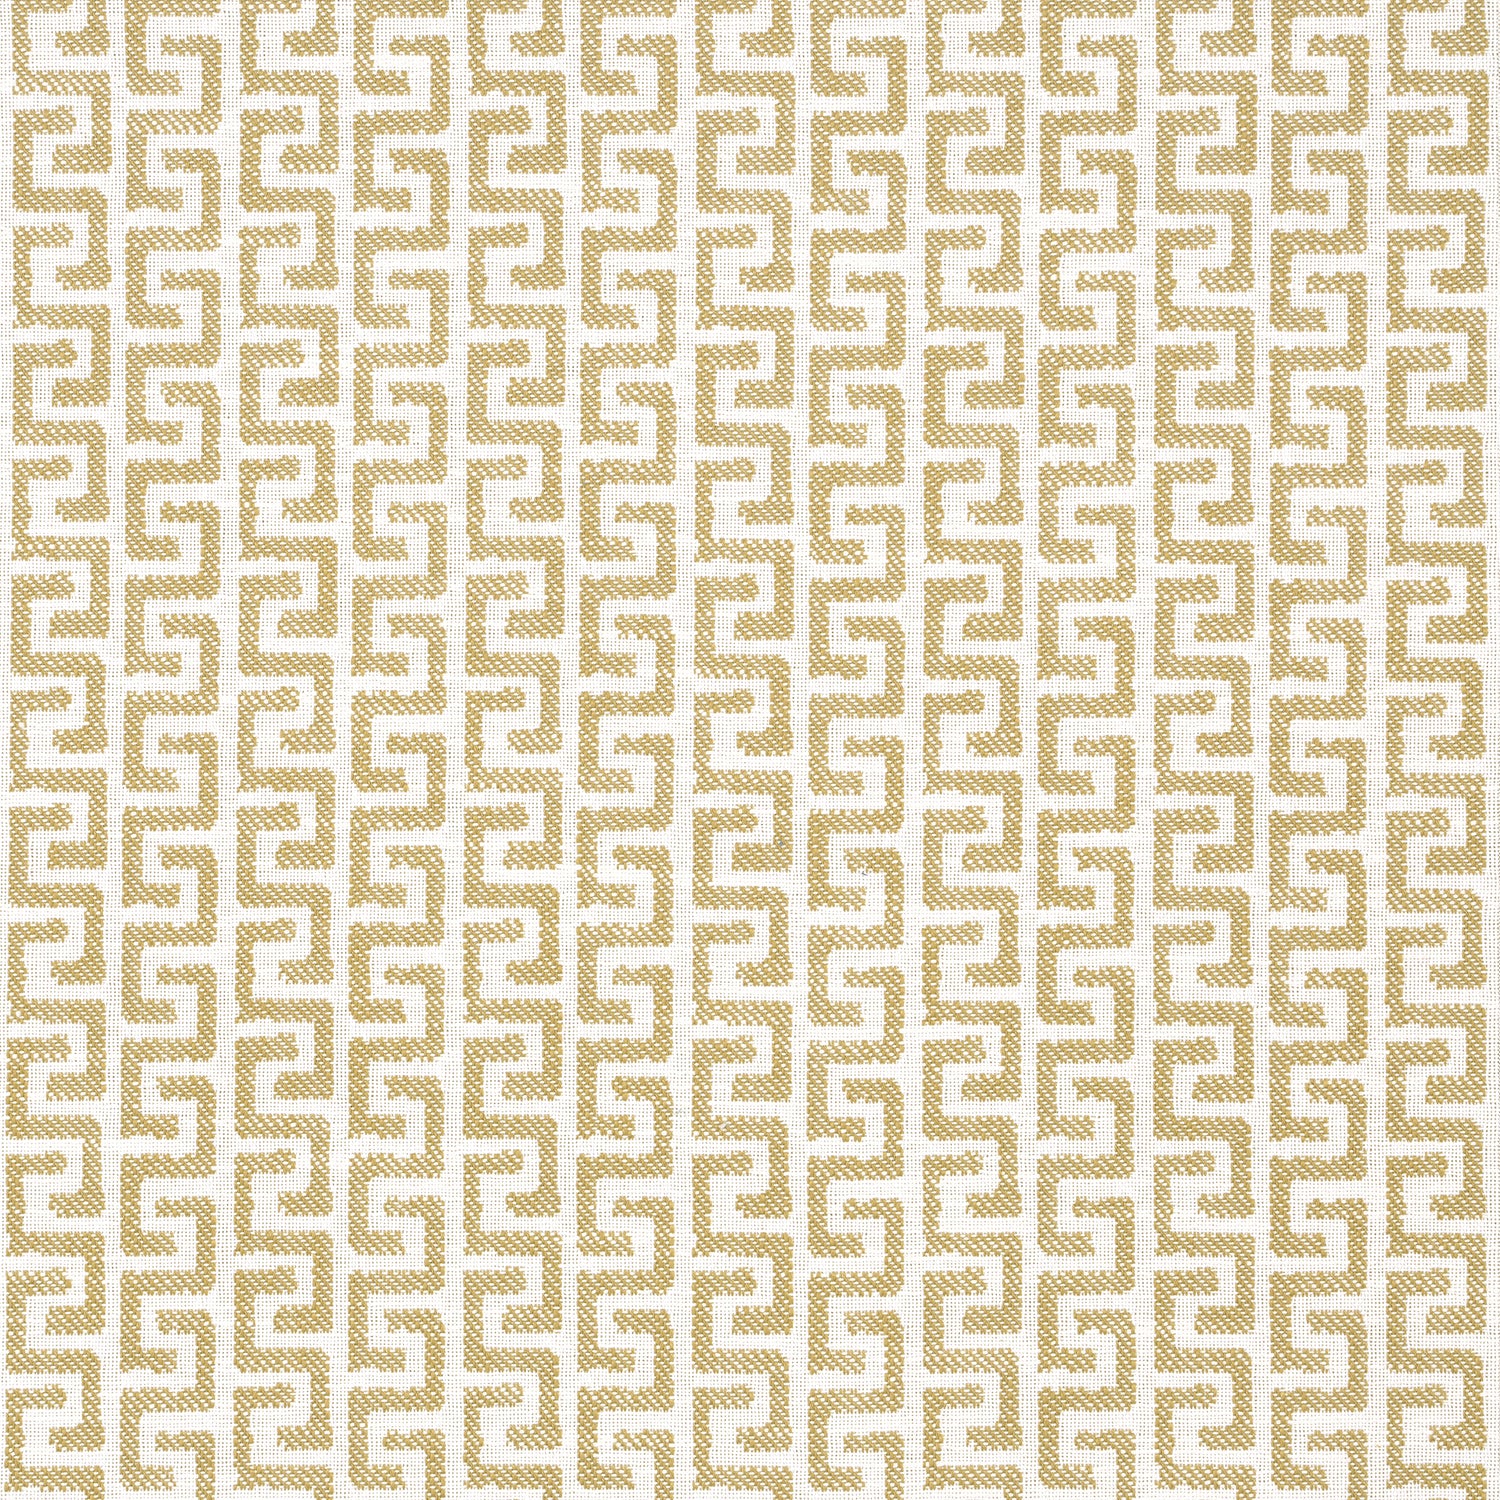 Merritt fabric in camel color - pattern number W74252 - by Thibaut in the Passage collection